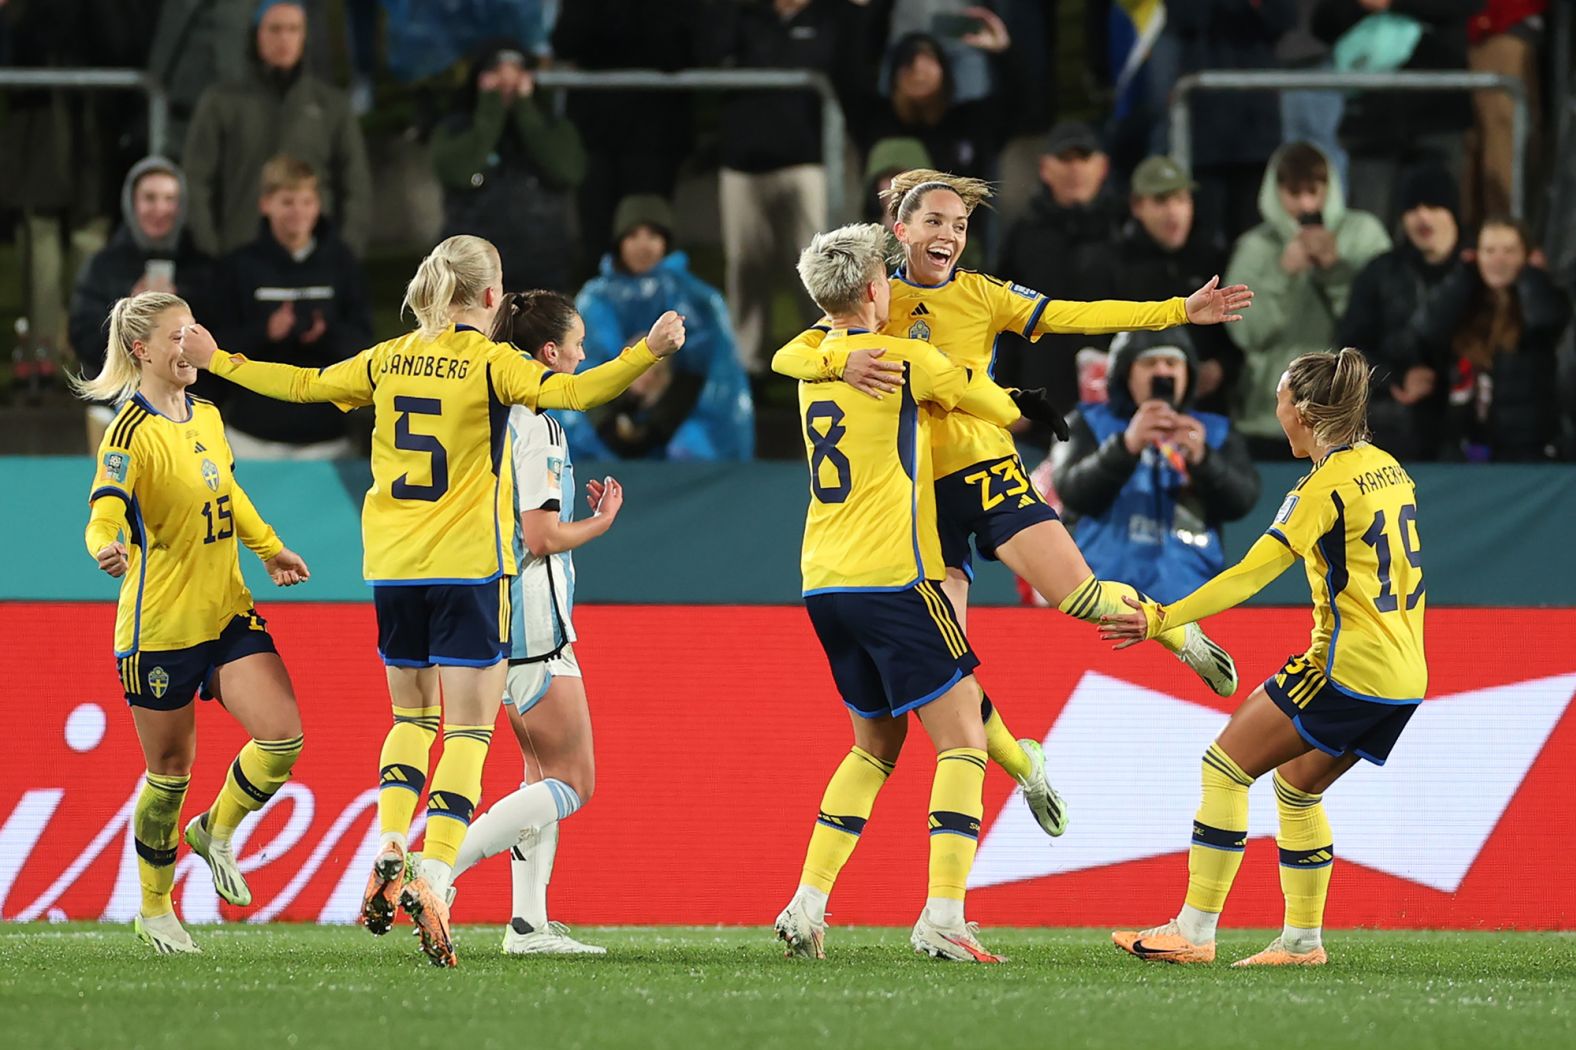 Sweden's Elin Rubensson celebrates after scoring from the penalty spot against Argentina on August 2. <a href="index.php?page=&url=https%3A%2F%2Fwww.cnn.com%2F2023%2F08%2F02%2Ffootball%2Fsweden-south-africa-italy-womens-world-cup-2023-spt-intl%2Findex.html" target="_blank">Sweden won 2-0</a>.